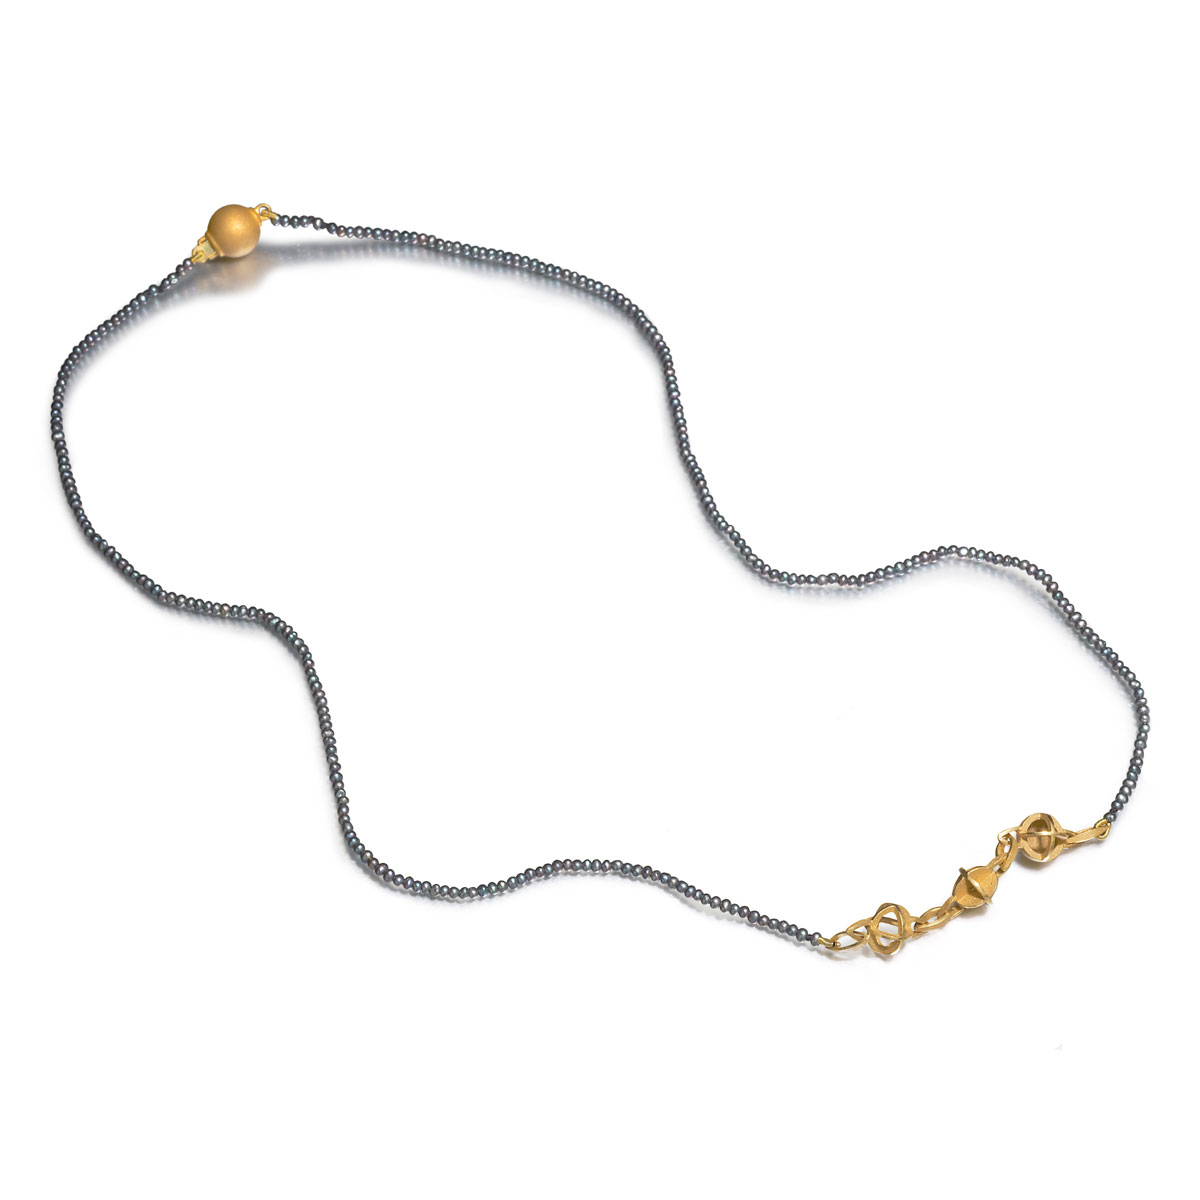 18ct gold orbital necklace with black pearls